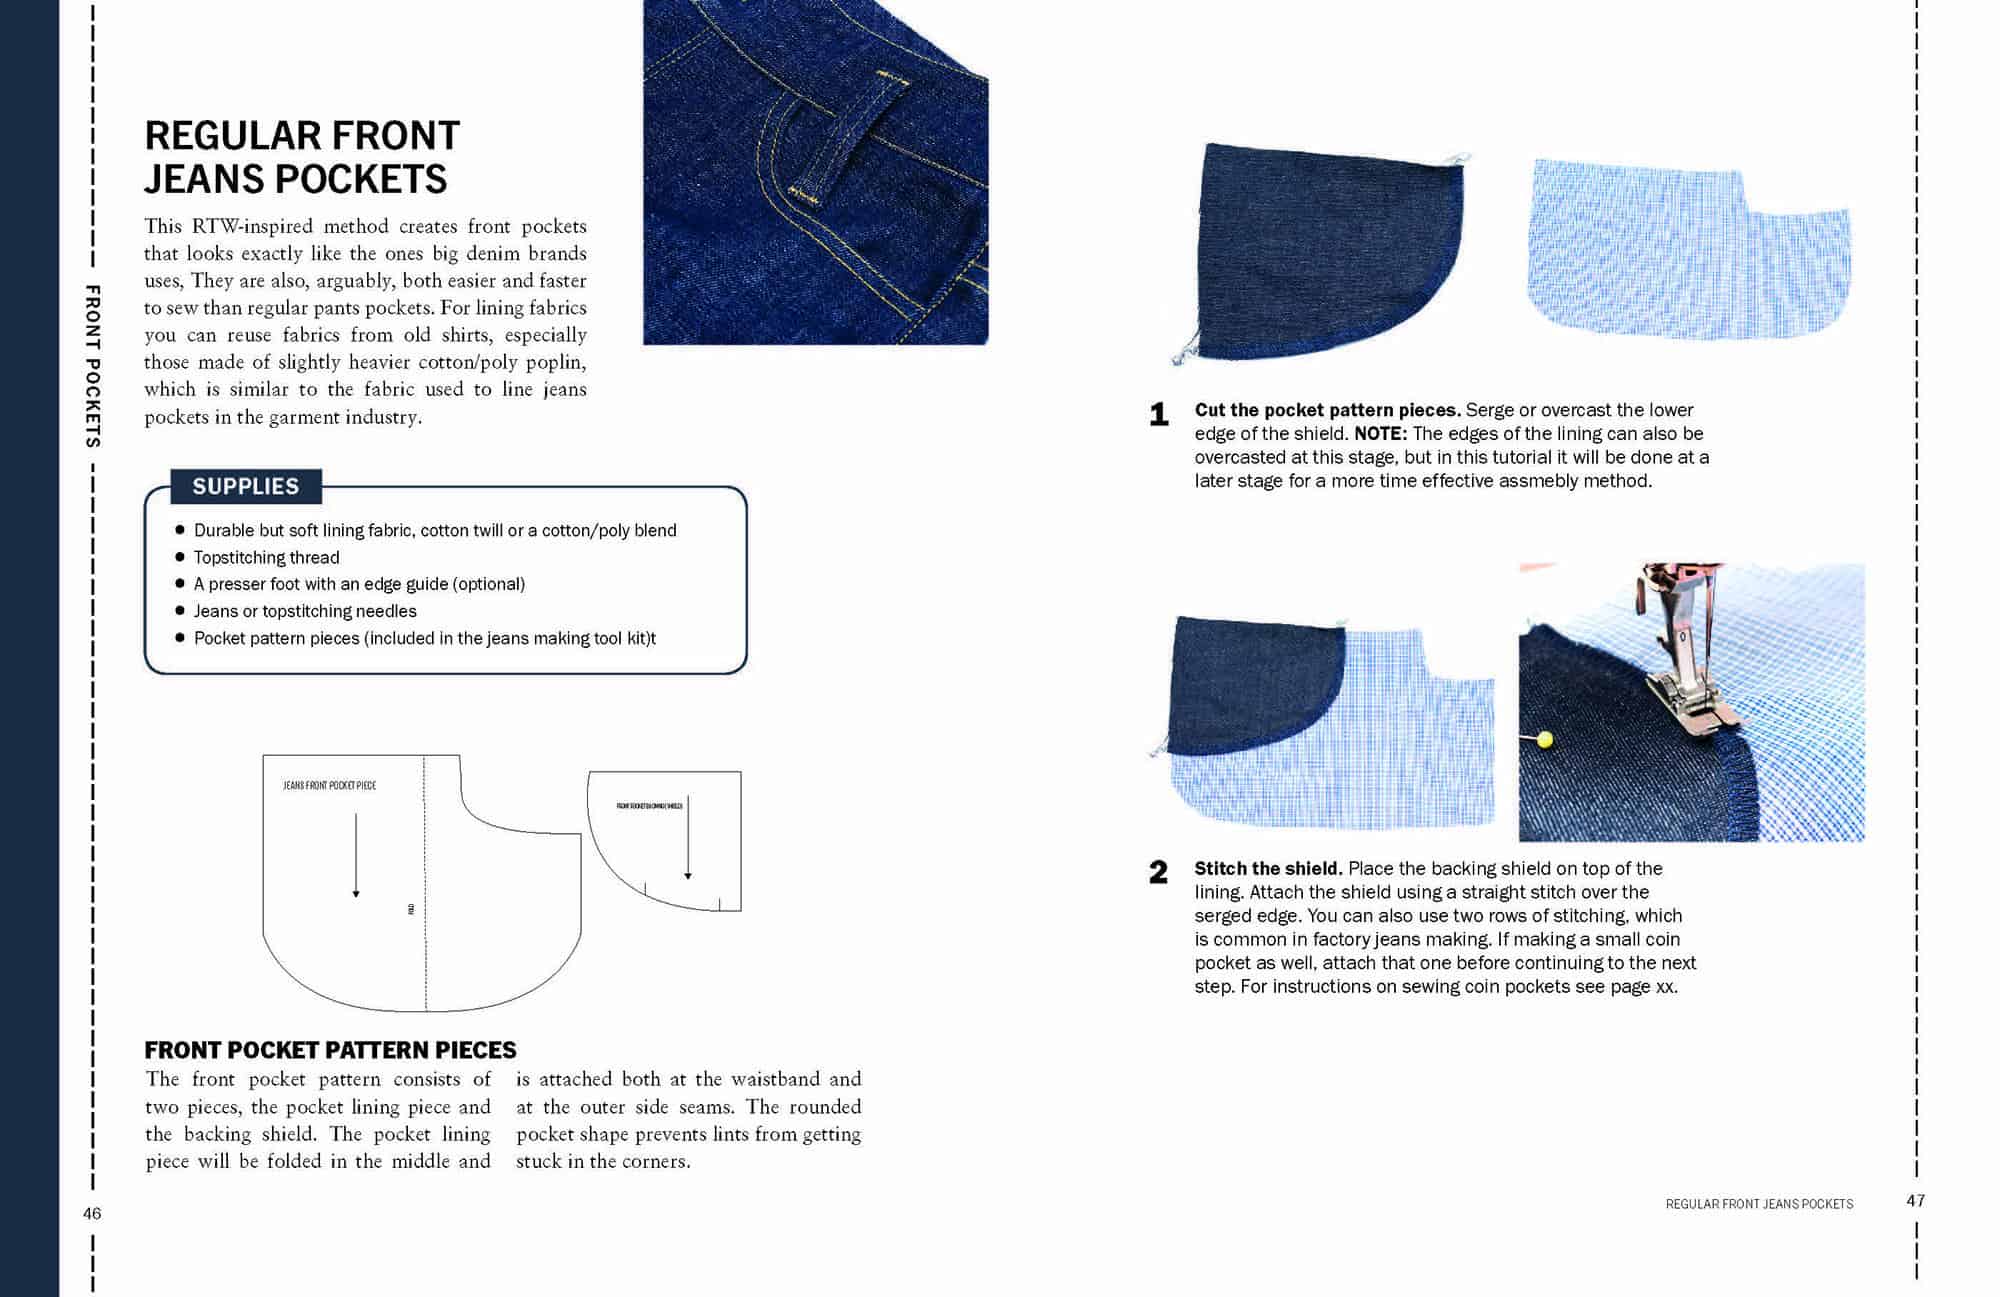 Professional Tailoring and Sewing Tips for Denim Stitches  Hello Laundry